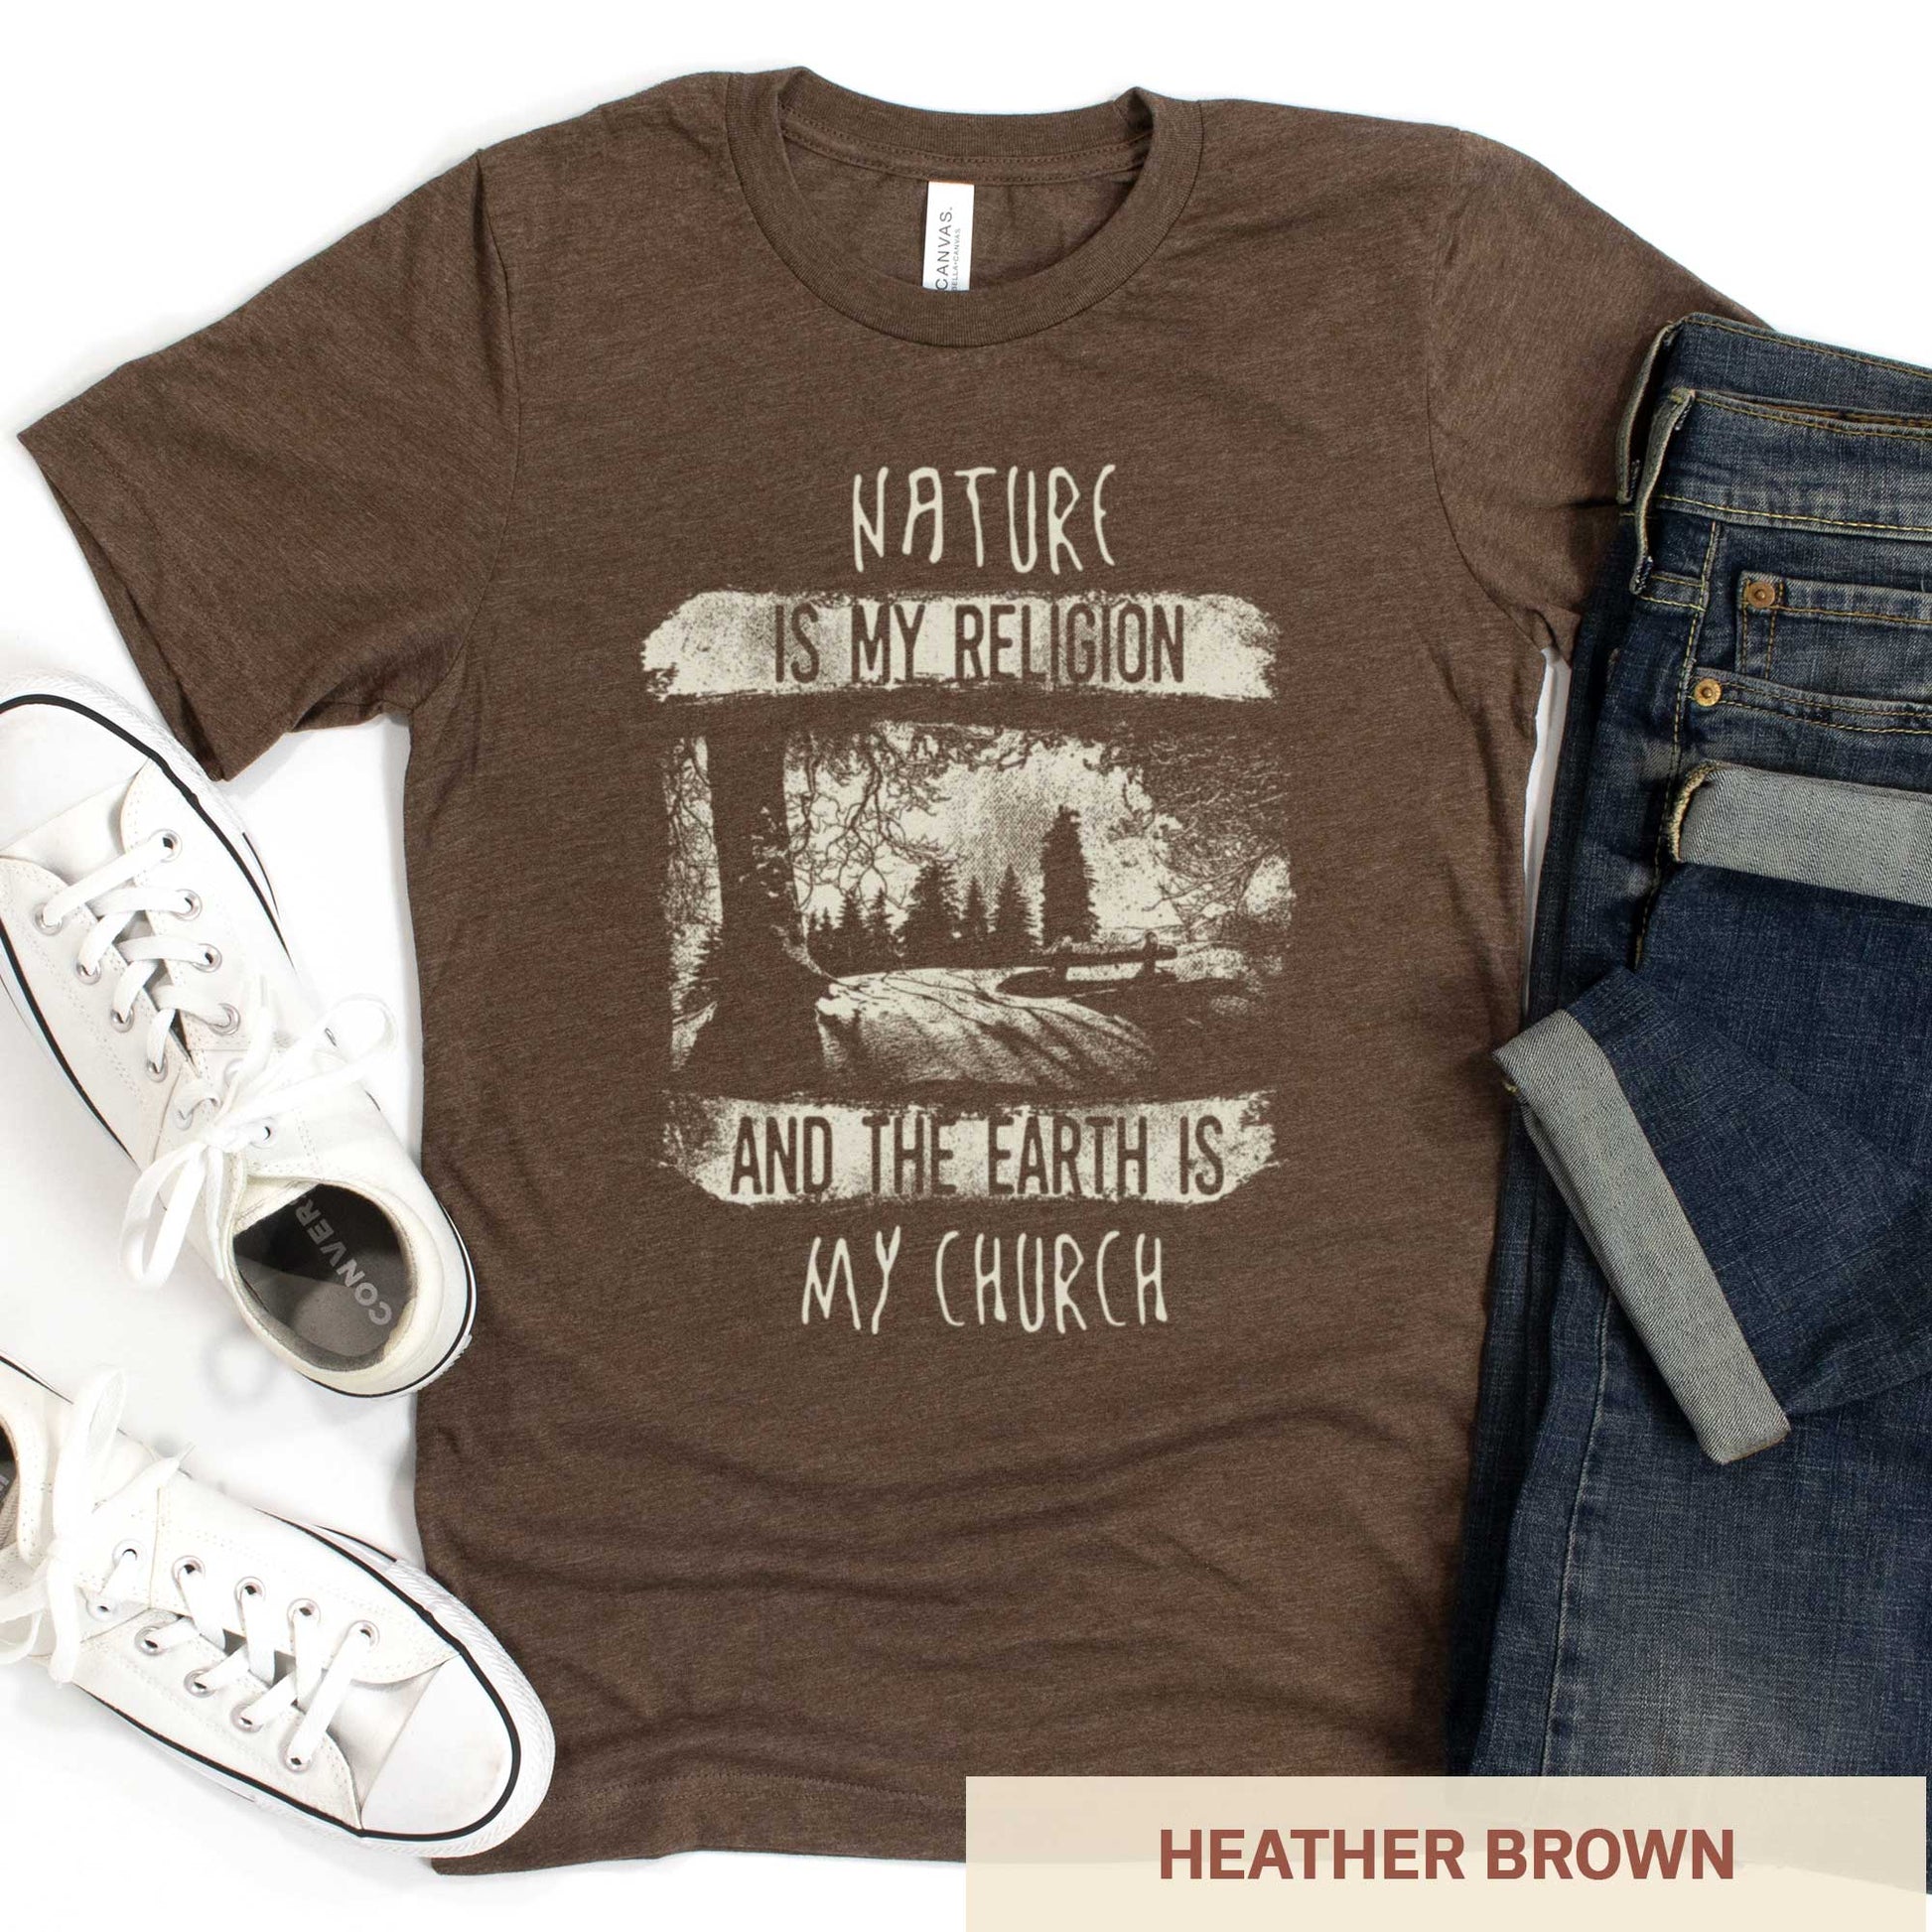 A heather brown Bella Canvas t-shirt featuring fields and a forest with the words nature is my religion and the earth is my church.